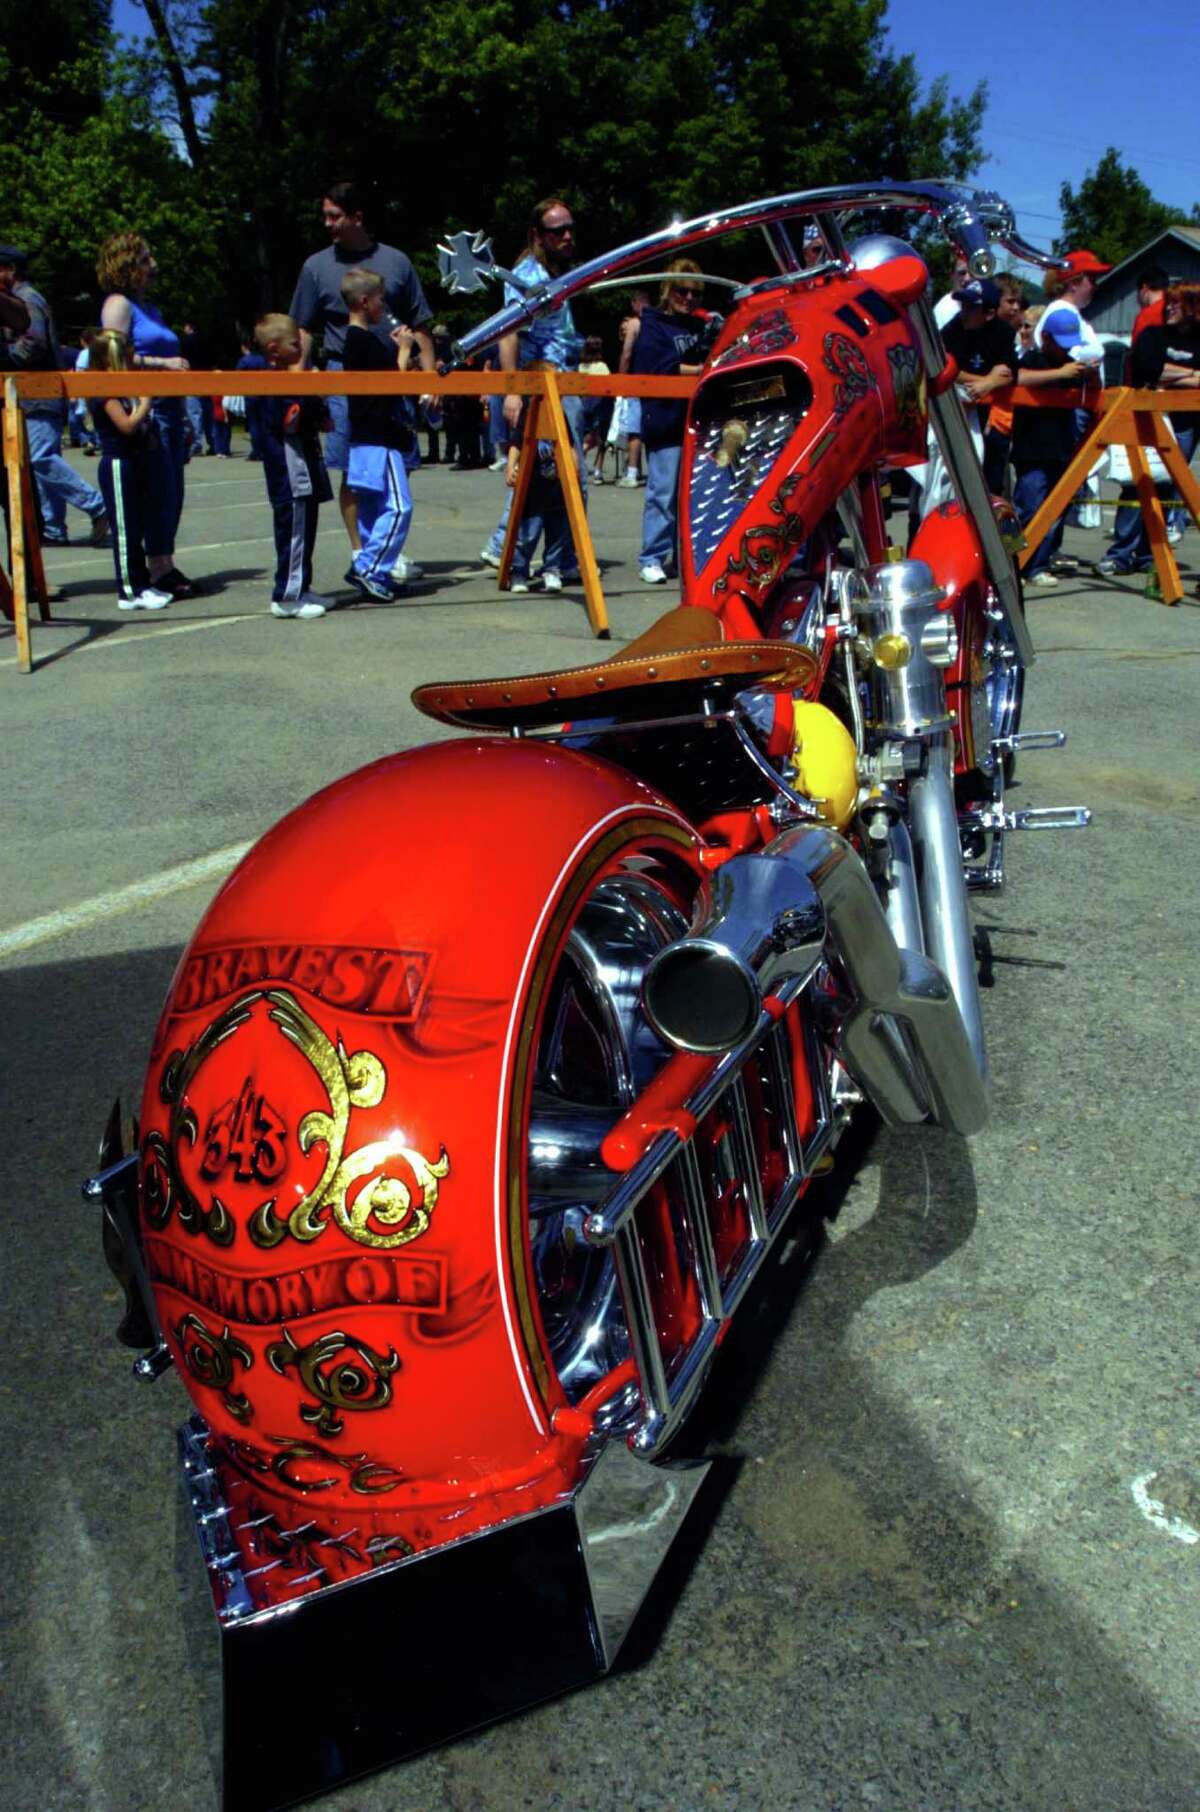 A motorcycle built to honor the NYFD firefighters who died on September 11, 2001,is on display along with other bikes built on the 